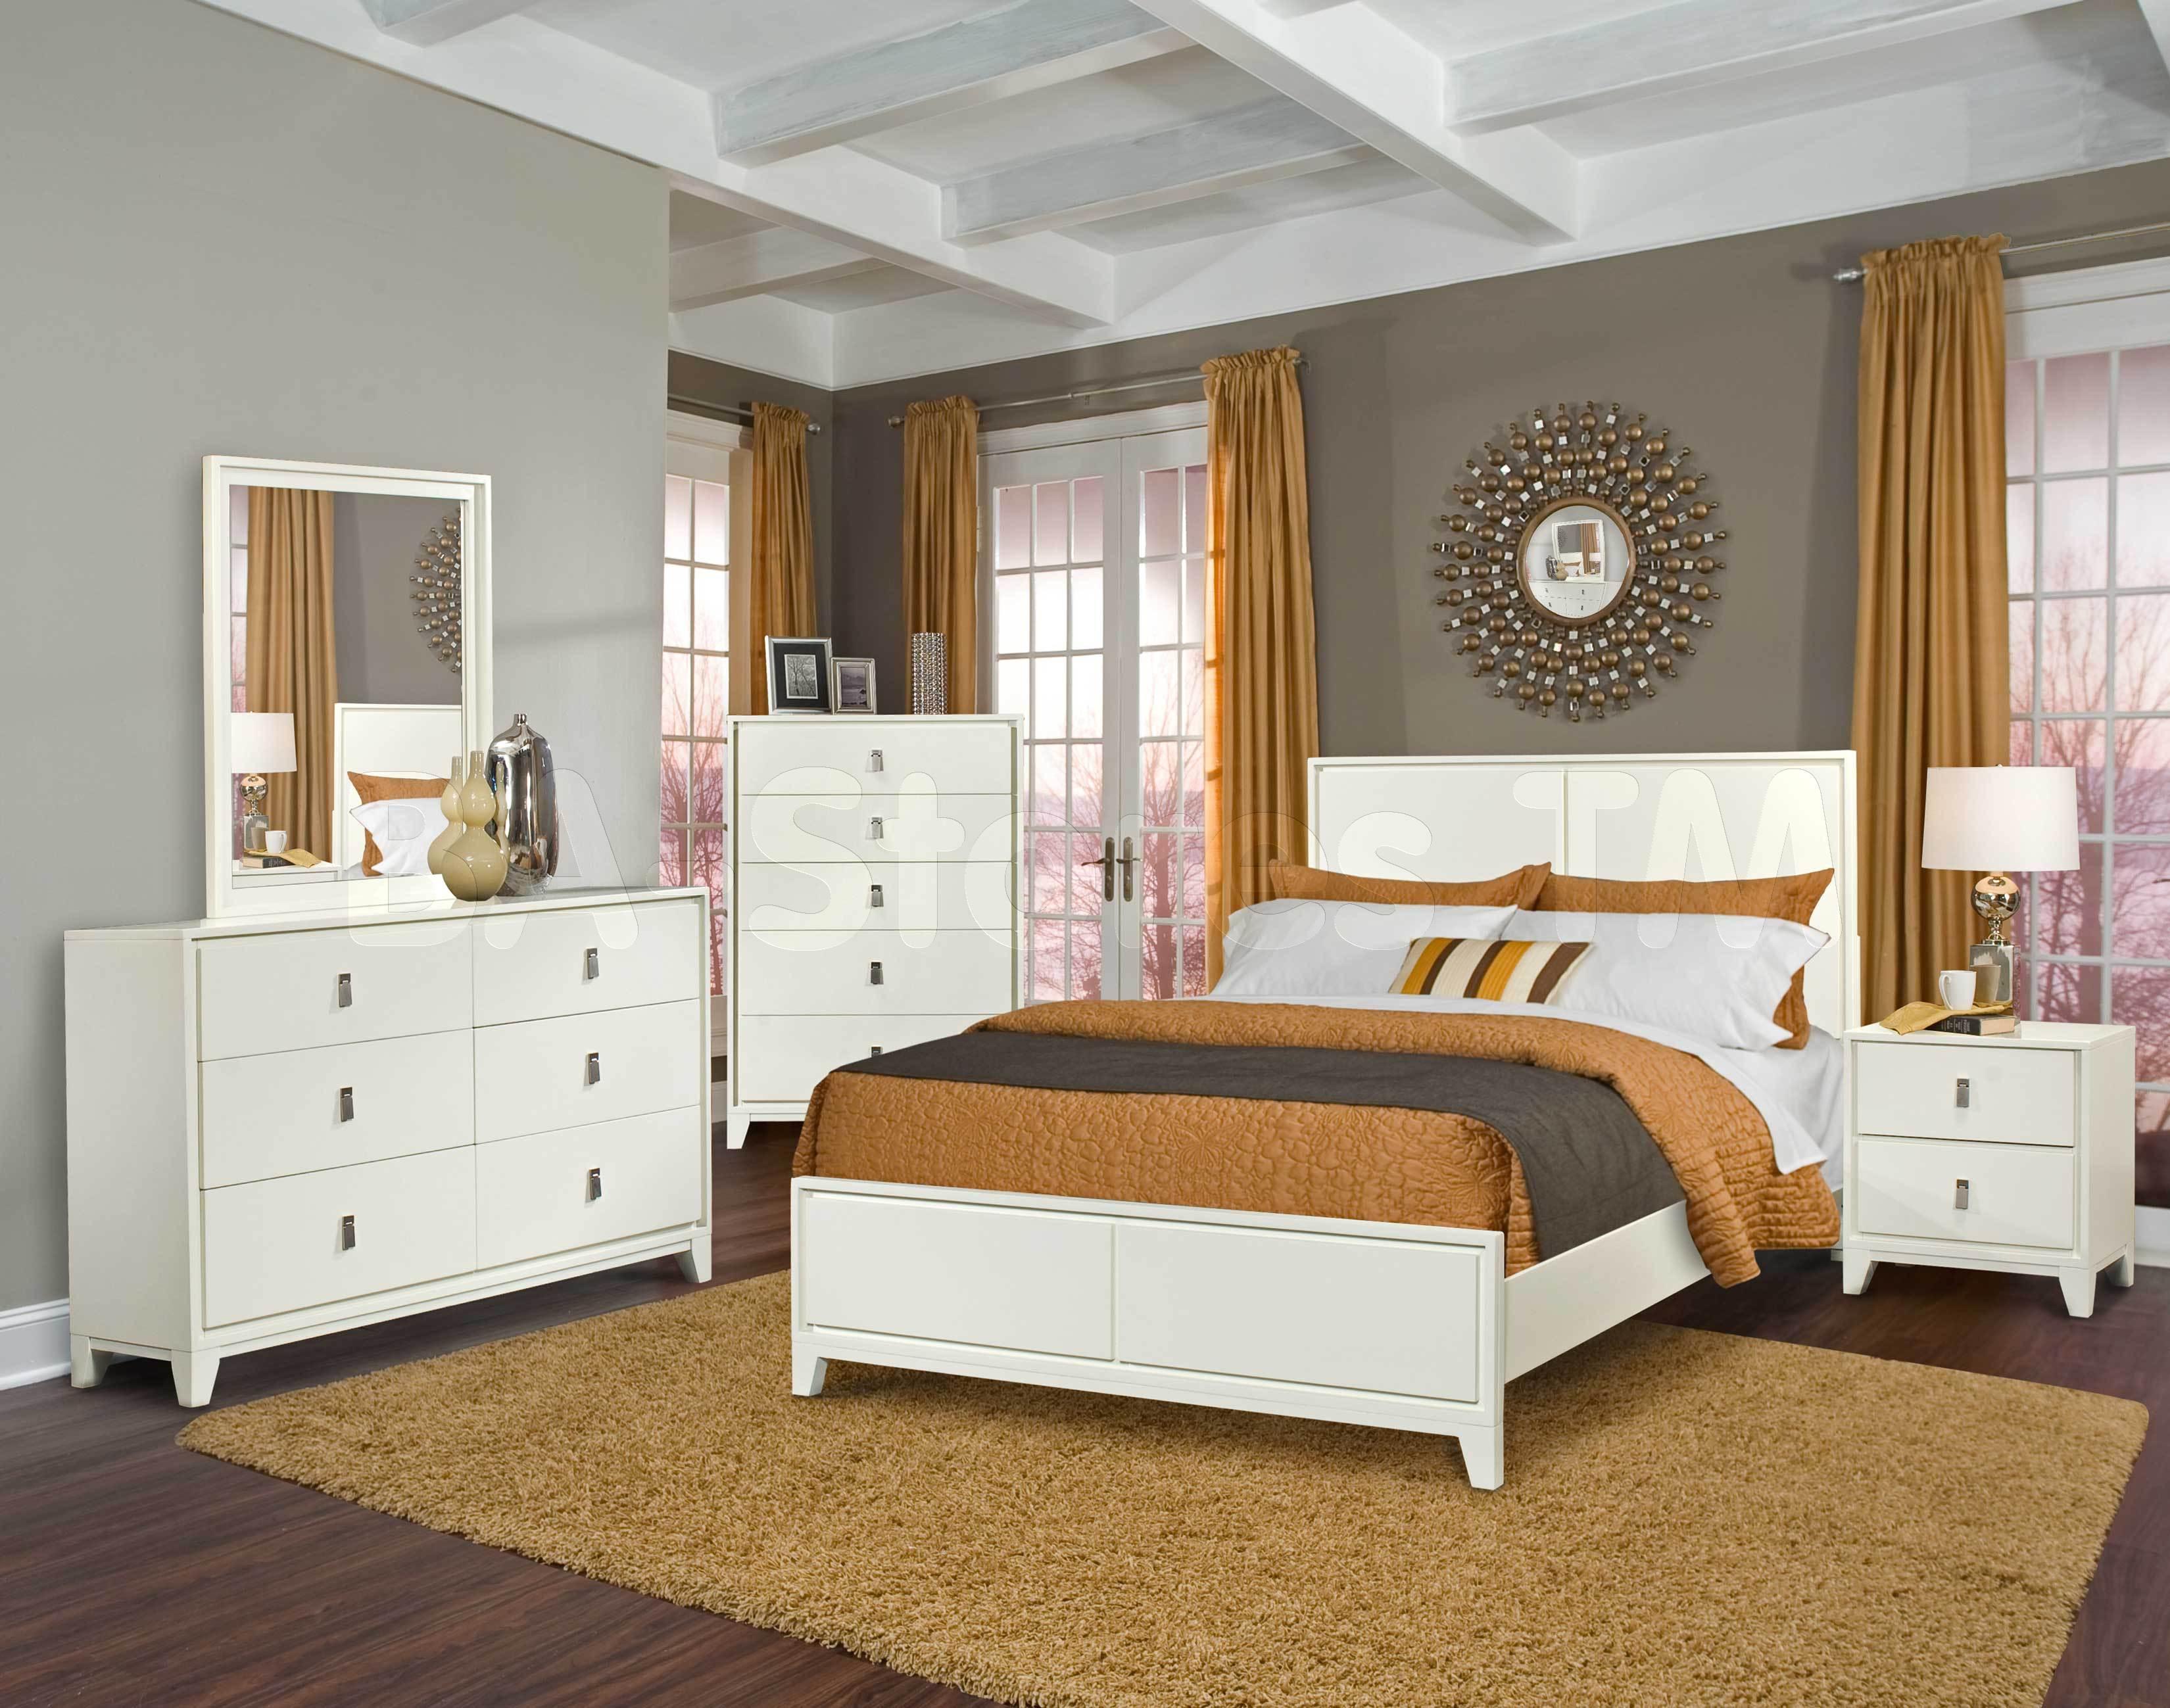 17 Timeless Bedroom Designs With Wooden Furniture For ...